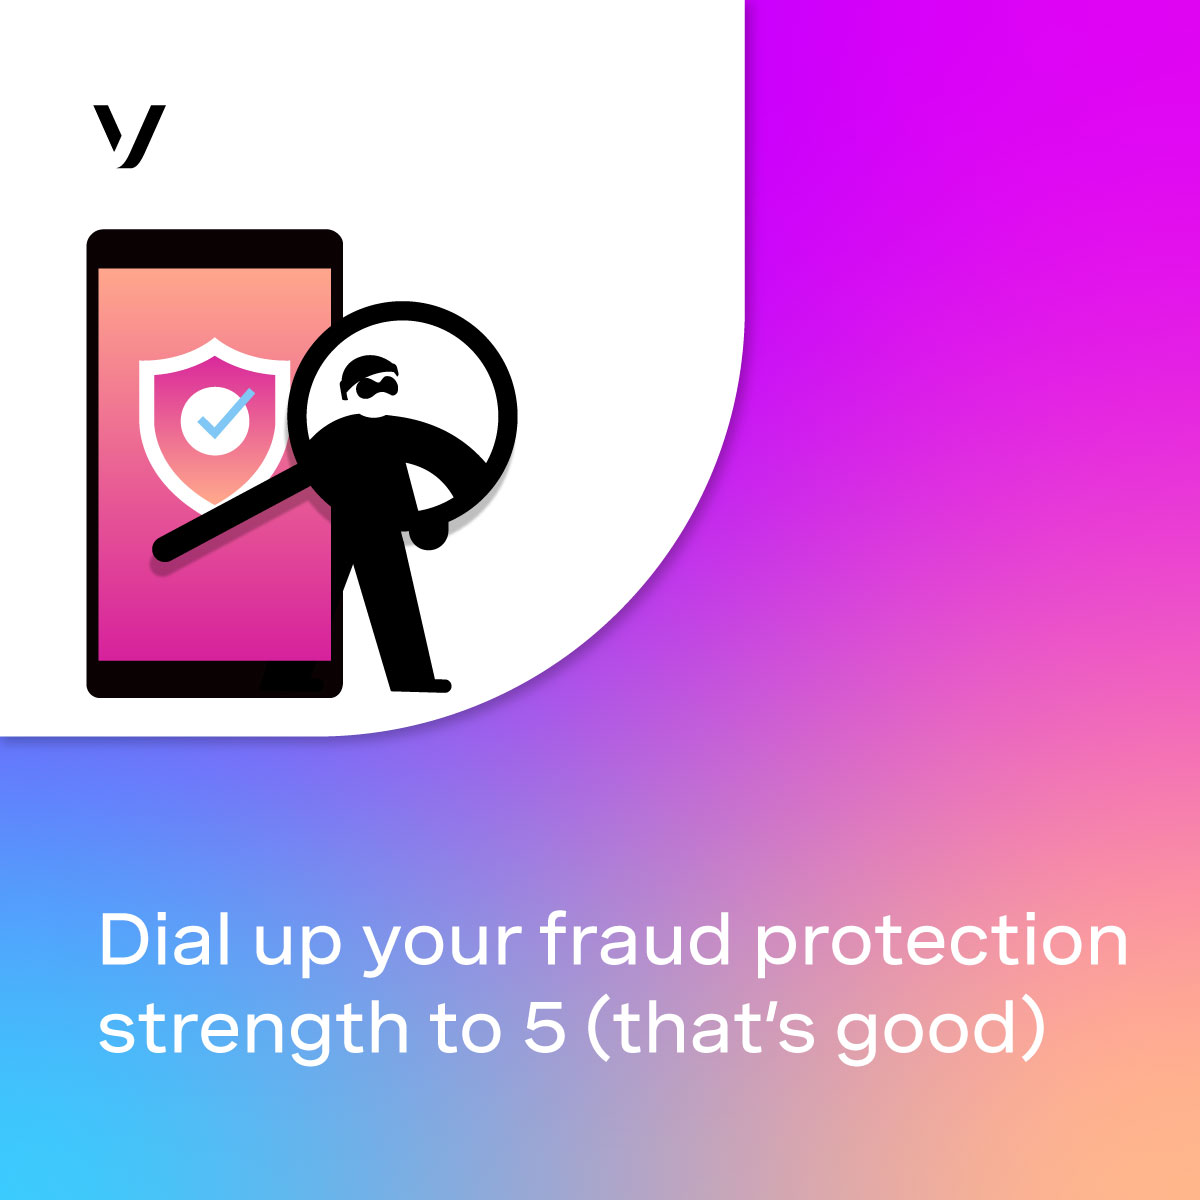 Learn how fraud can take on all shapes and sizes. Then discover five ways to strengthen your business fraud protection. bit.ly/3WJootY #APIs #CPaaS #2FA